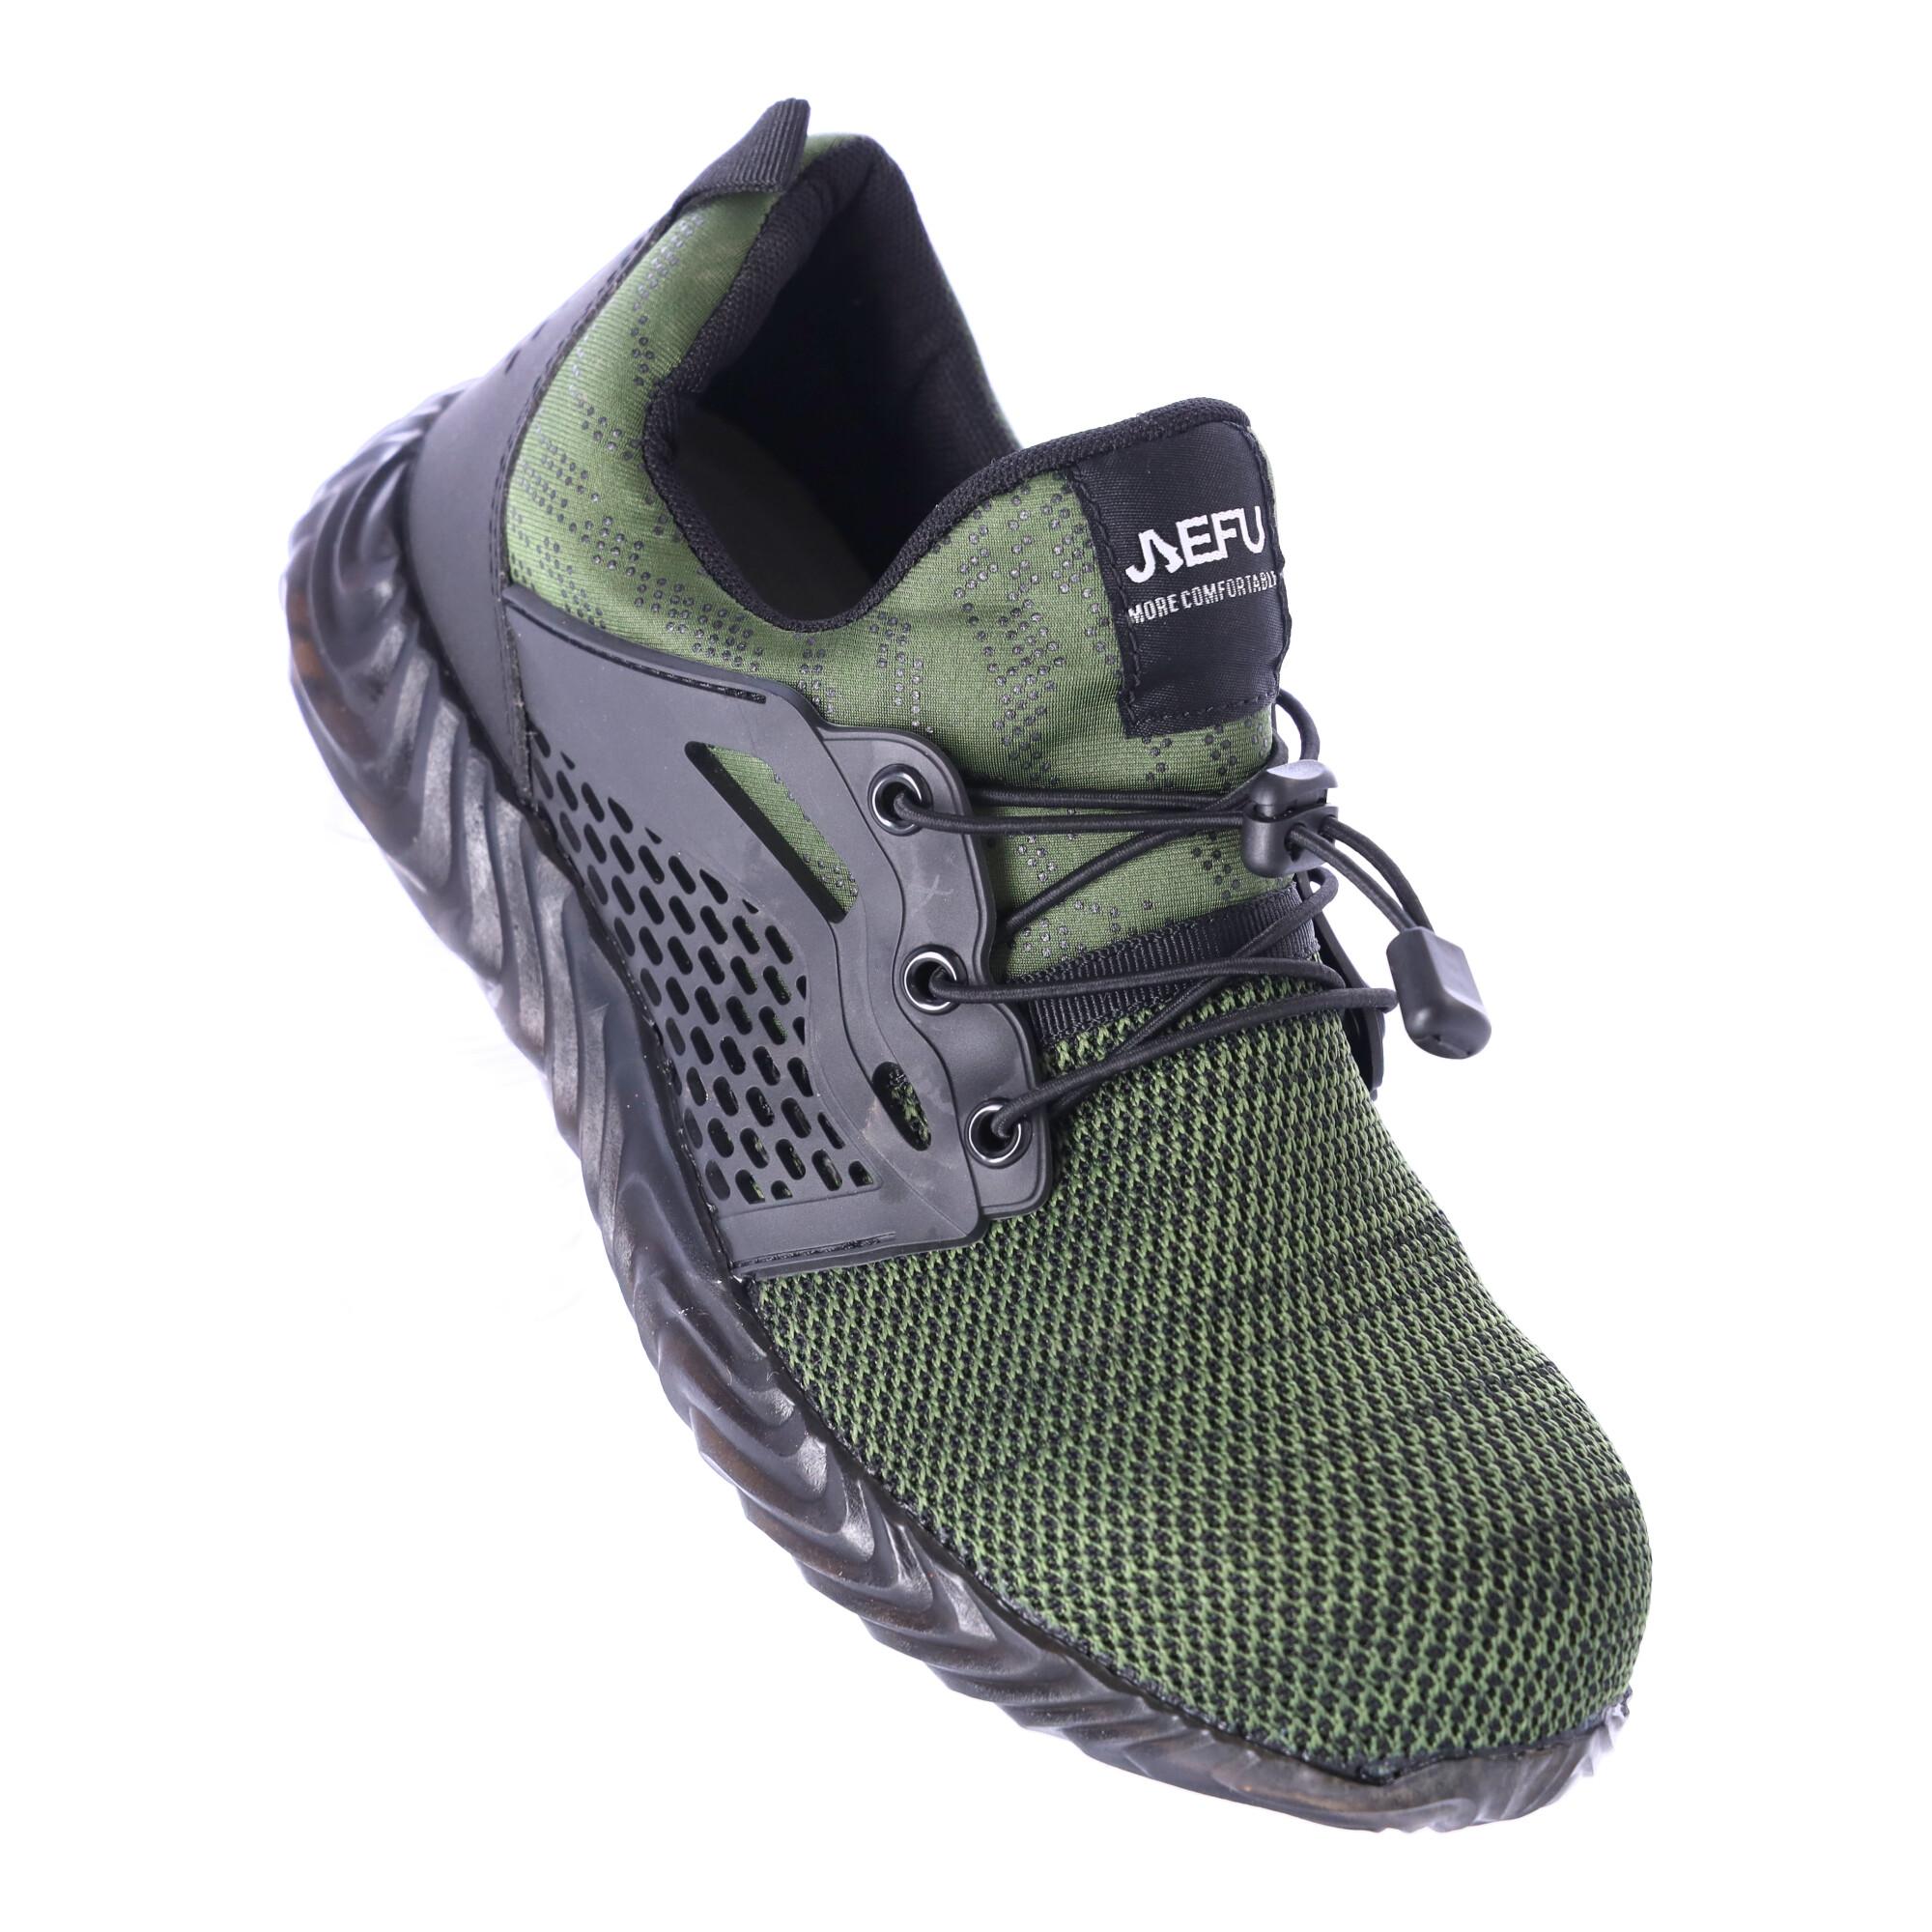 Work safety shoes "42" - green